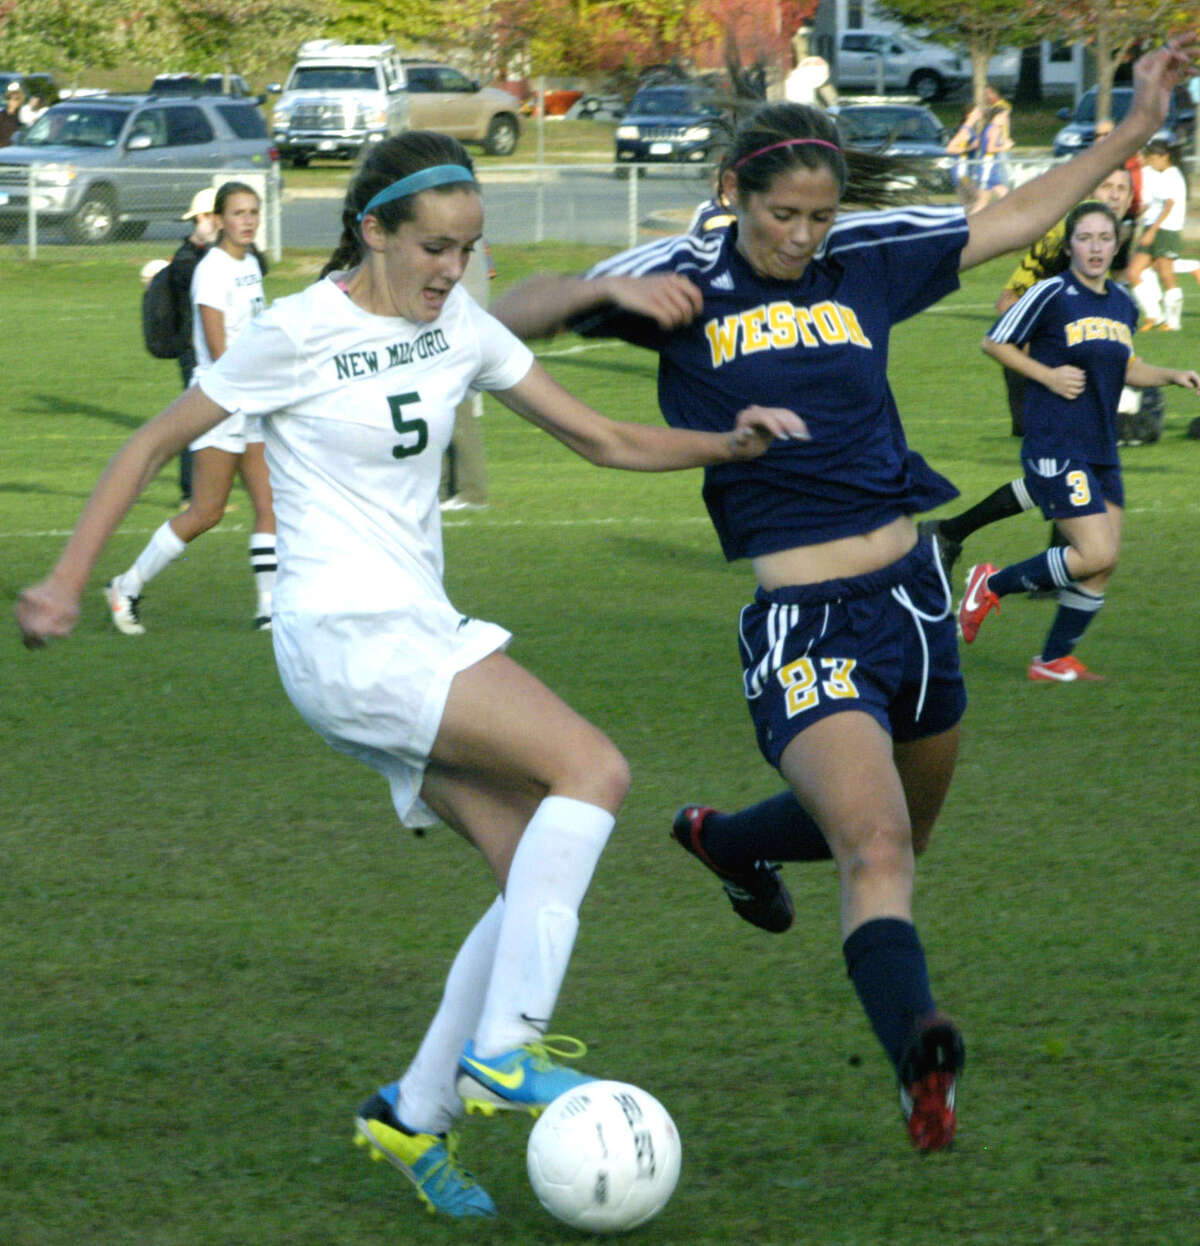 The Green Wave's Rachel Weir slams on the breaks to avoid Trojan defensive efforts during New Milford High School girls' soccer's 1-0 defeat to visiting Weston, Oct. 8, 2013.